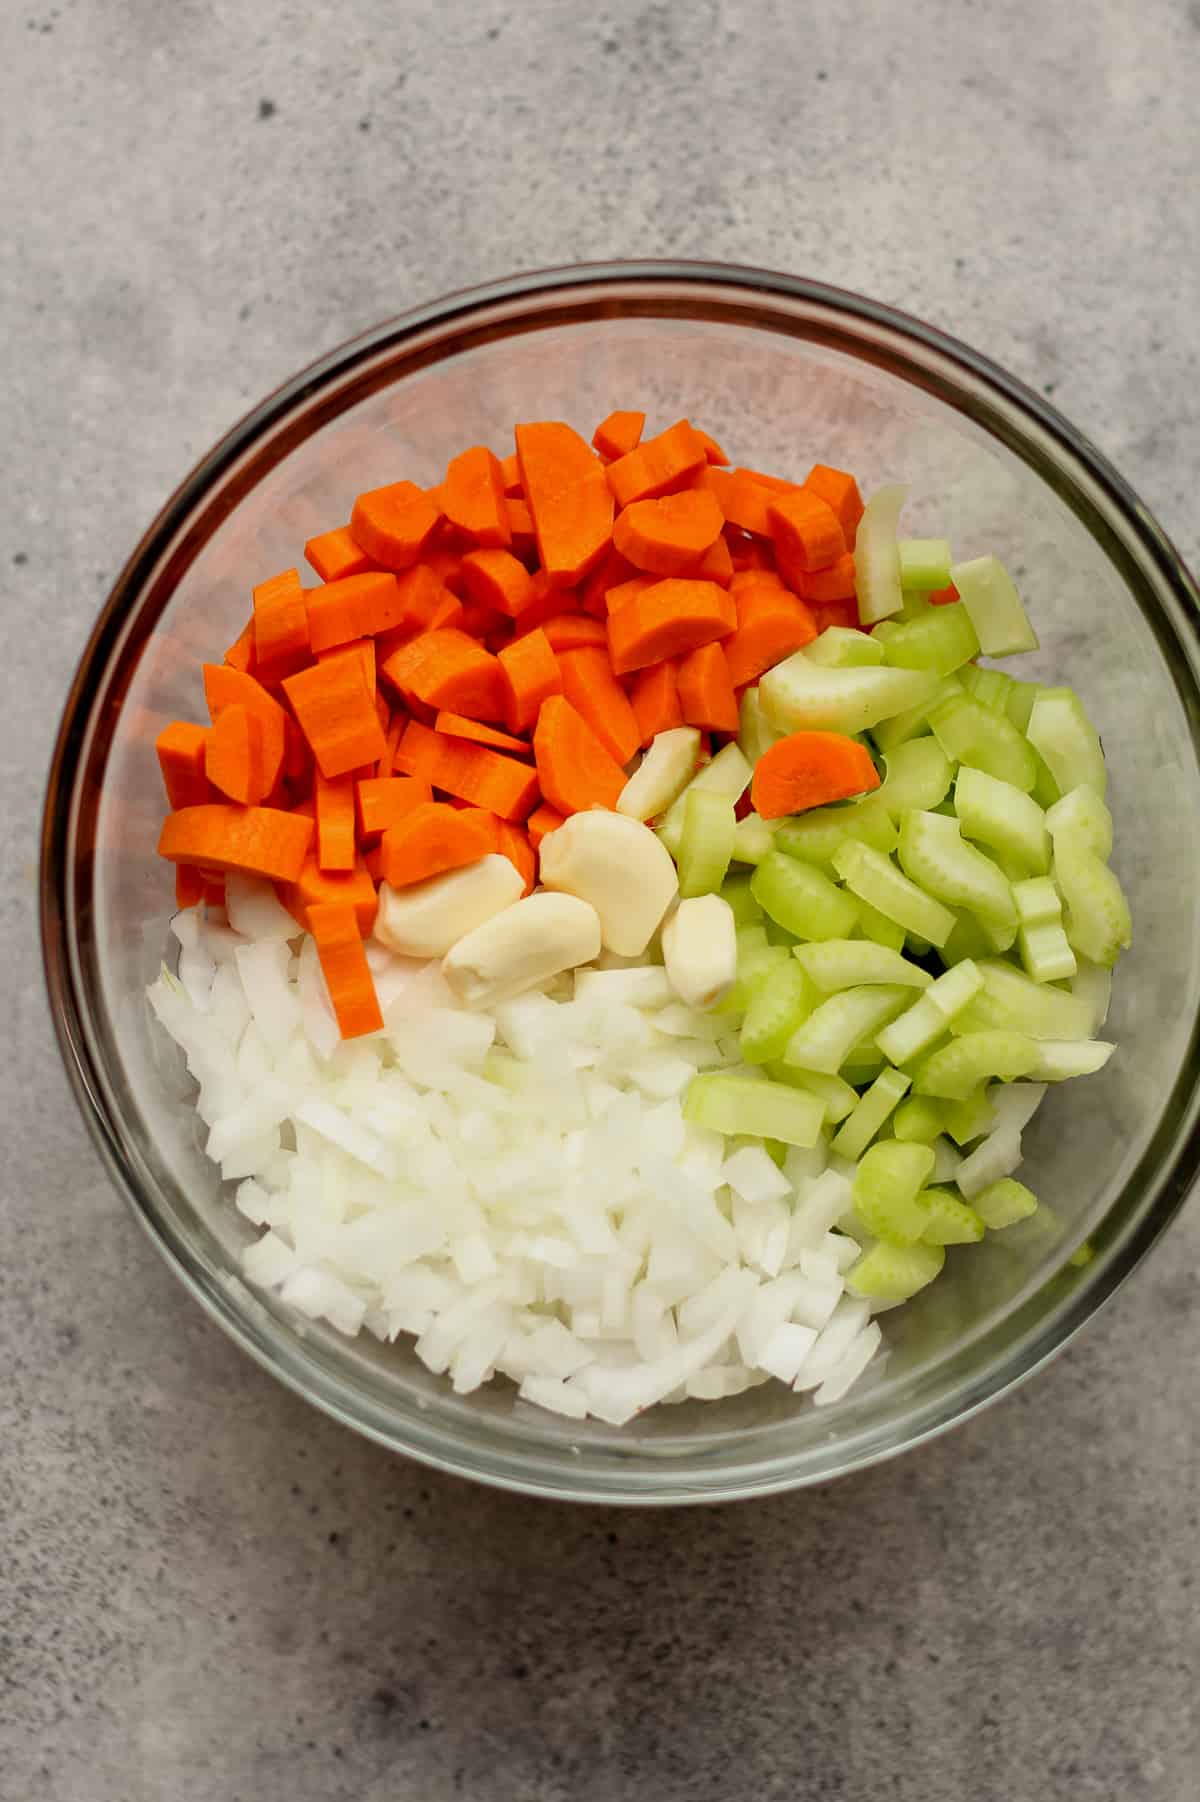 The bowl of chopped carrots, celery, onion, and garlic.